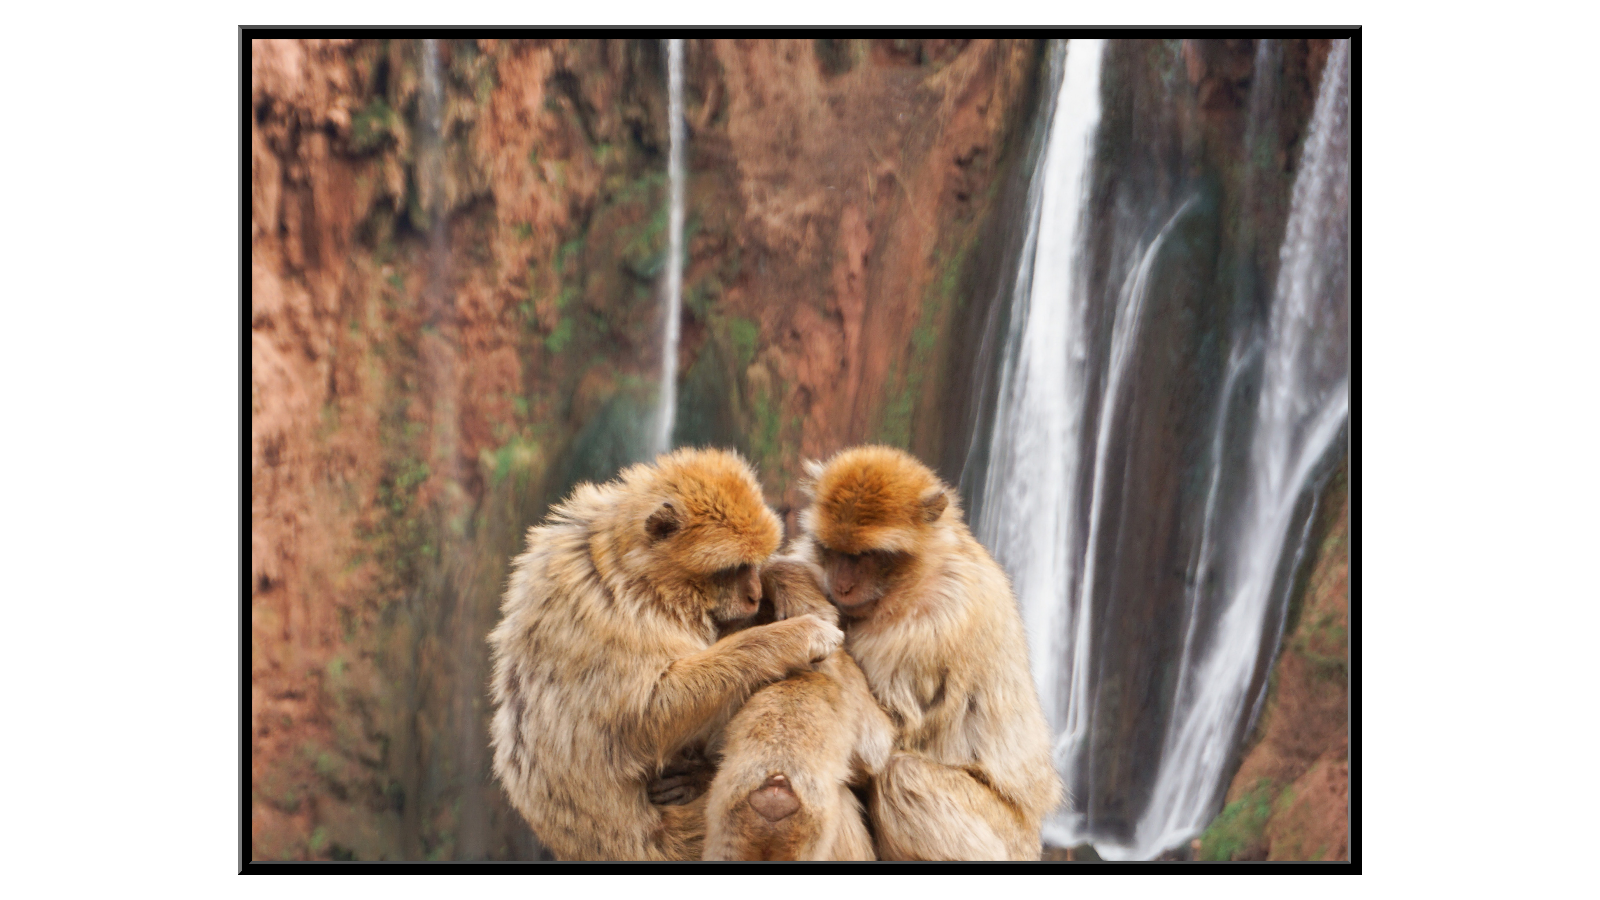 Monkey family in front of waterfall